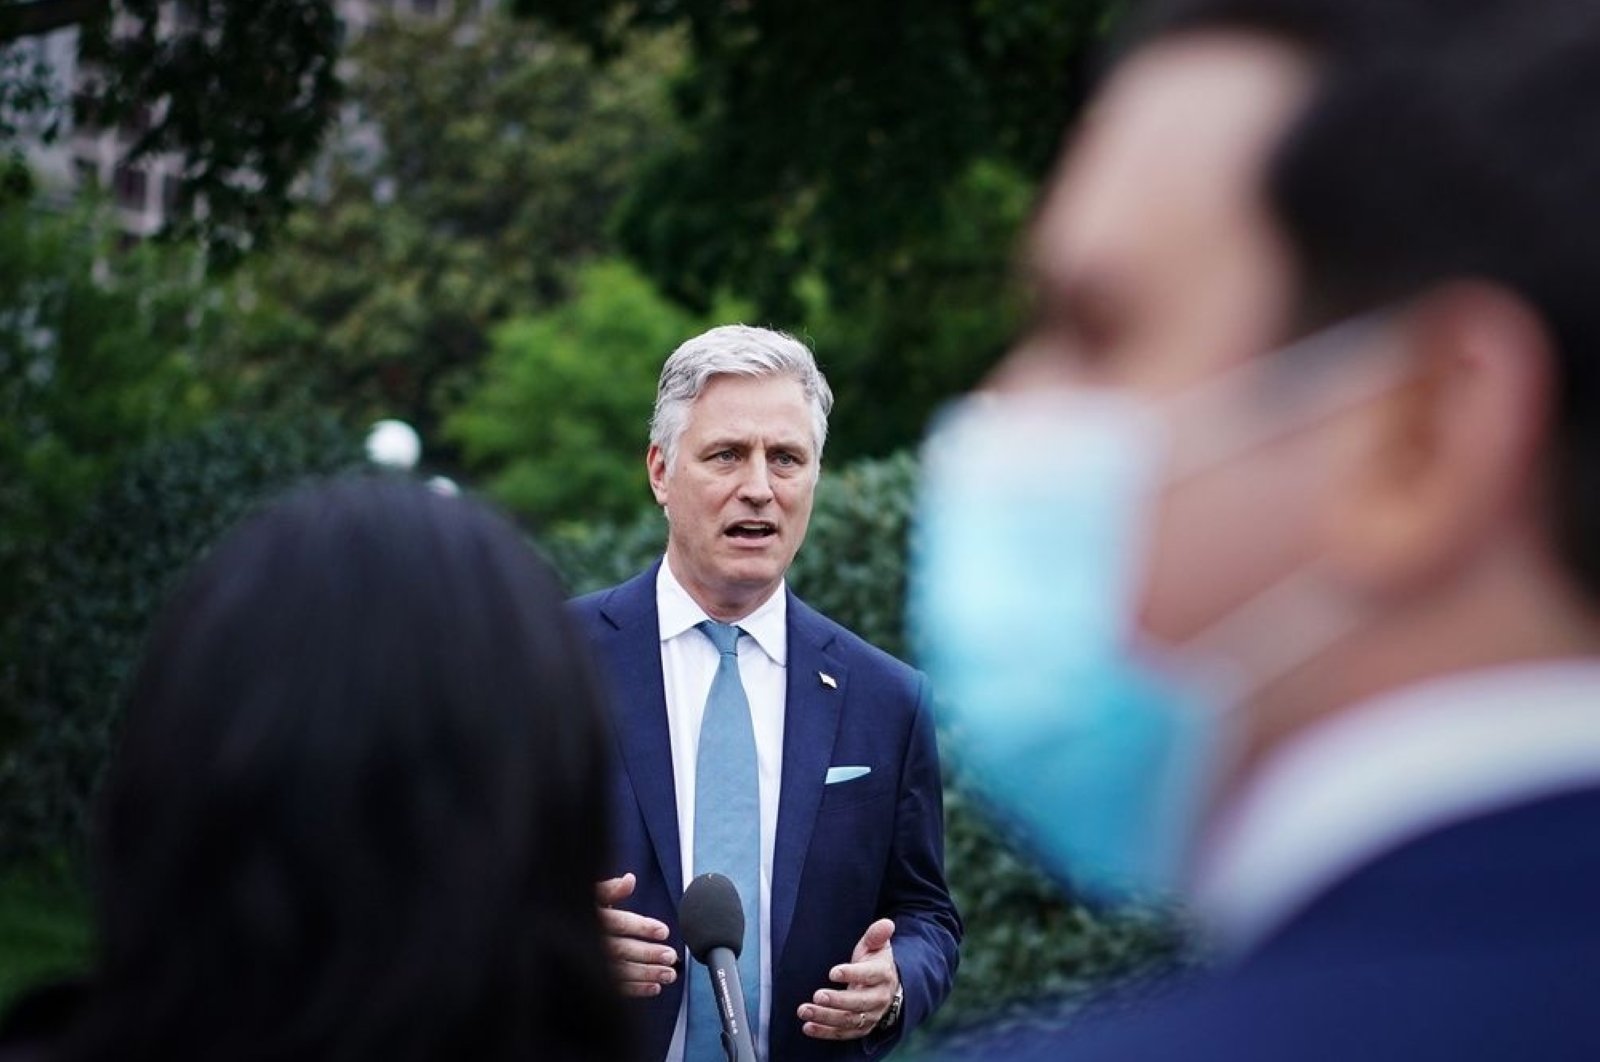 Robert O'Brien speaks to reporters outside of the West Wing of the White House, Washington, D.C., May 21, 2020. (AFP Photo) 